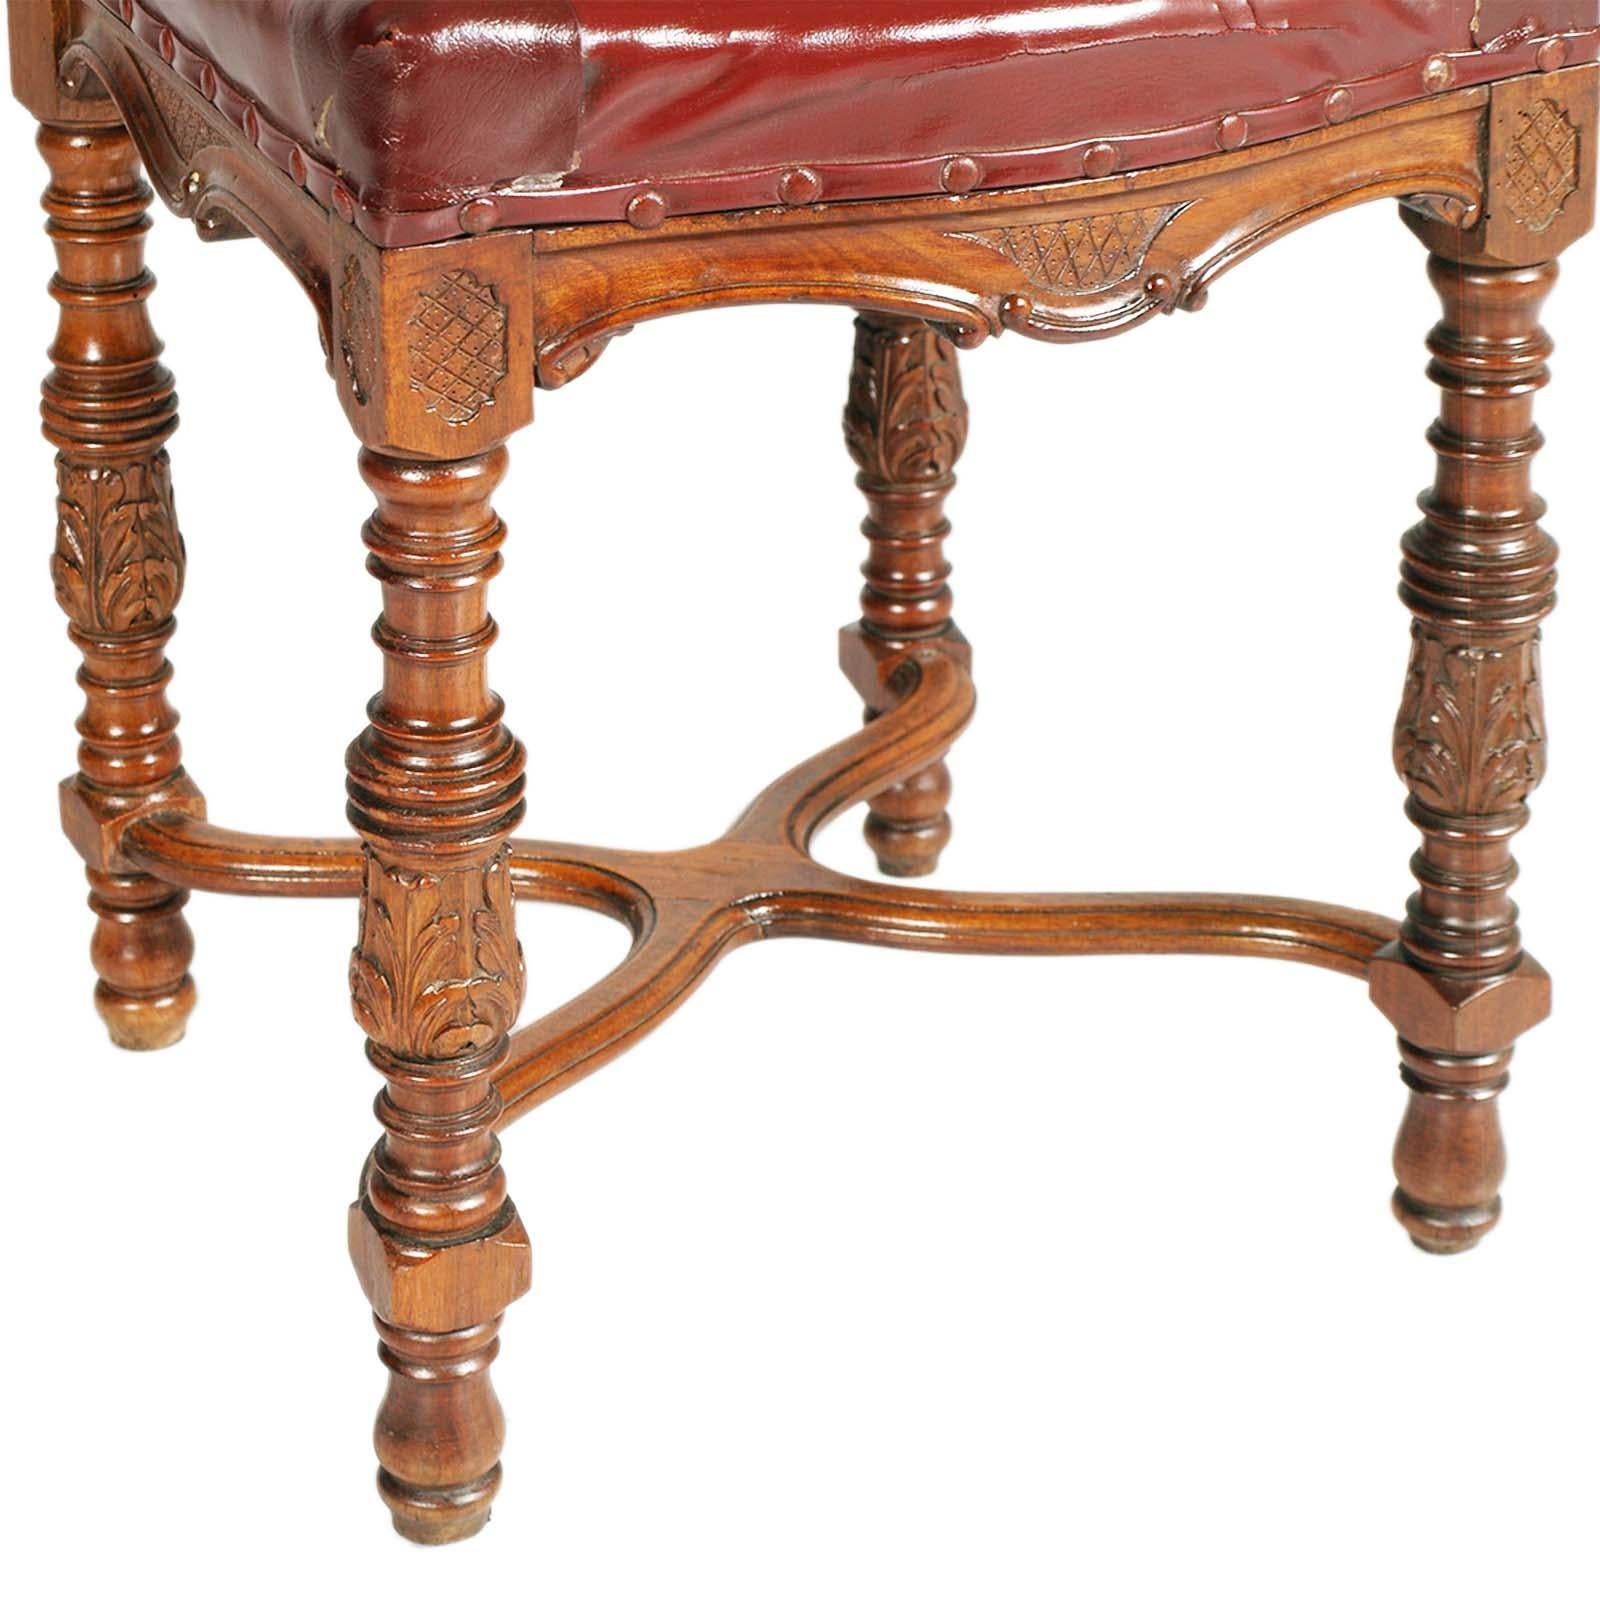 1880s Italian Chairs Neoclassic Eclectic Hand Carved Walnut Leather Upholstered For Sale 2